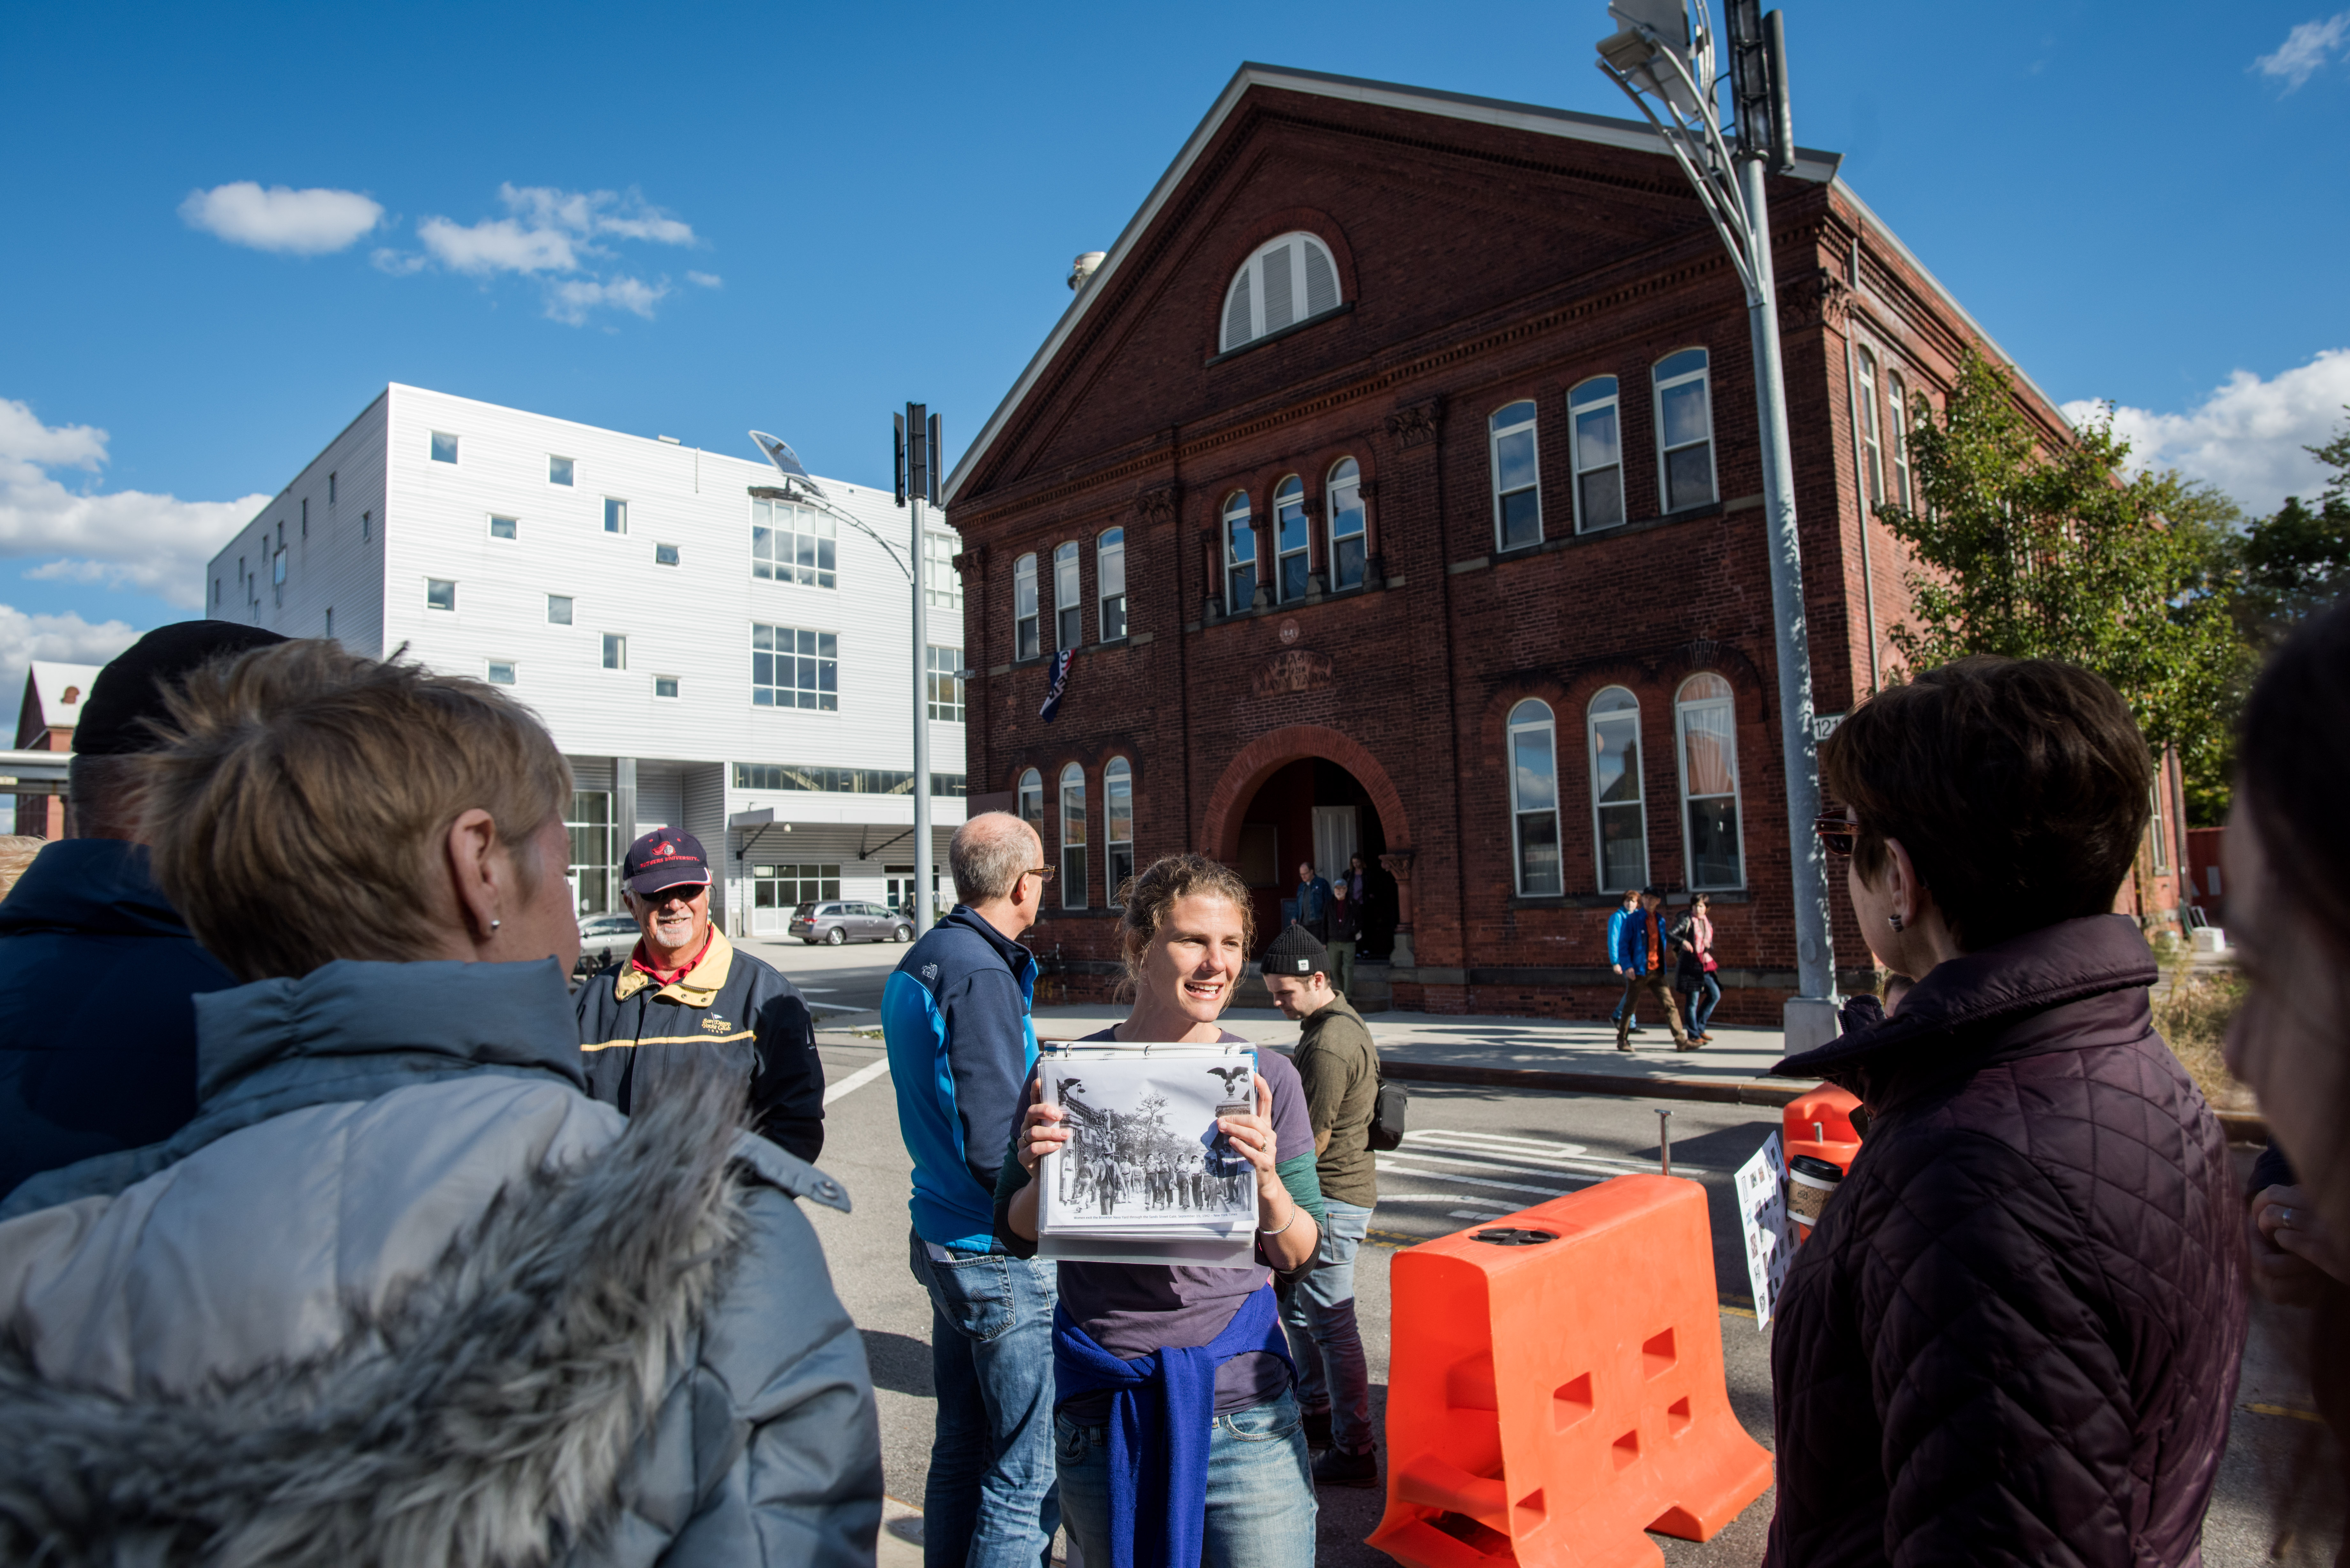 A guide is smiling and holding a historical photo of workers walking into the entrance of the Brooklyn Navy Yard as people look on. In the background, there are wind and solar-powered street lamps, a historic red brick building, and a modern industrial multi-story building.